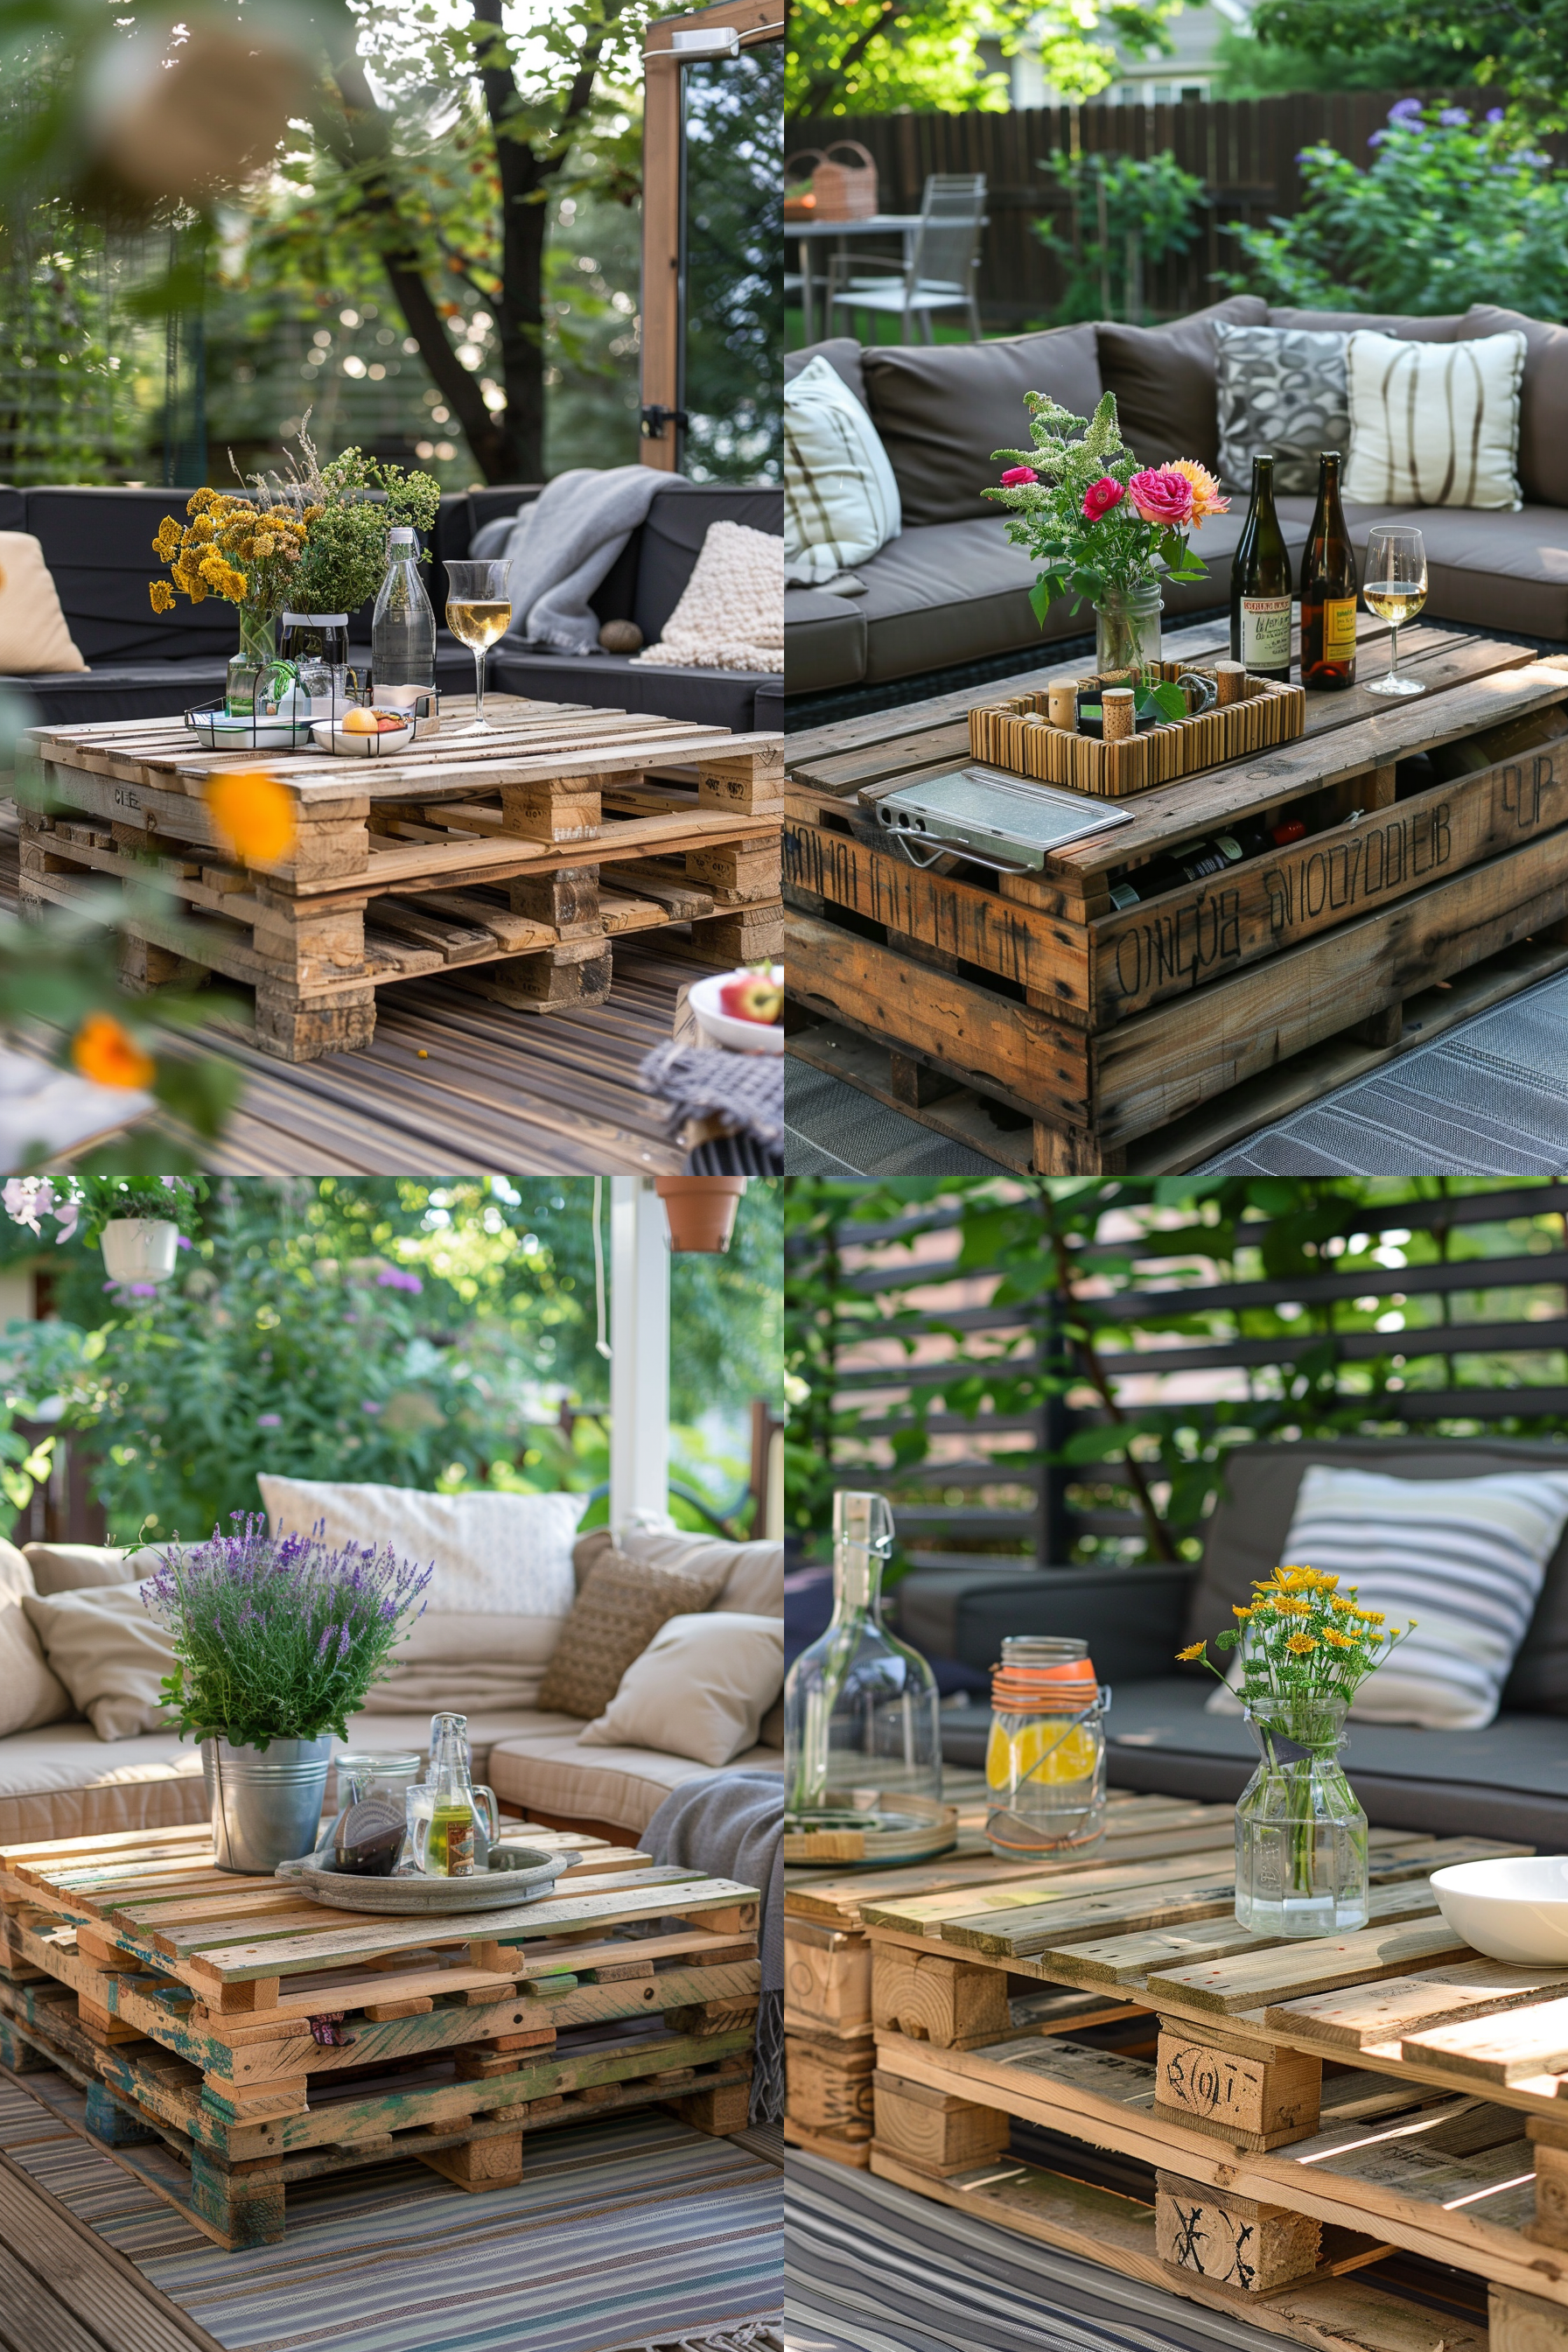 Outdoor living space featuring furniture made of stacked wooden pallets, with cushions, plants, and decorative items.